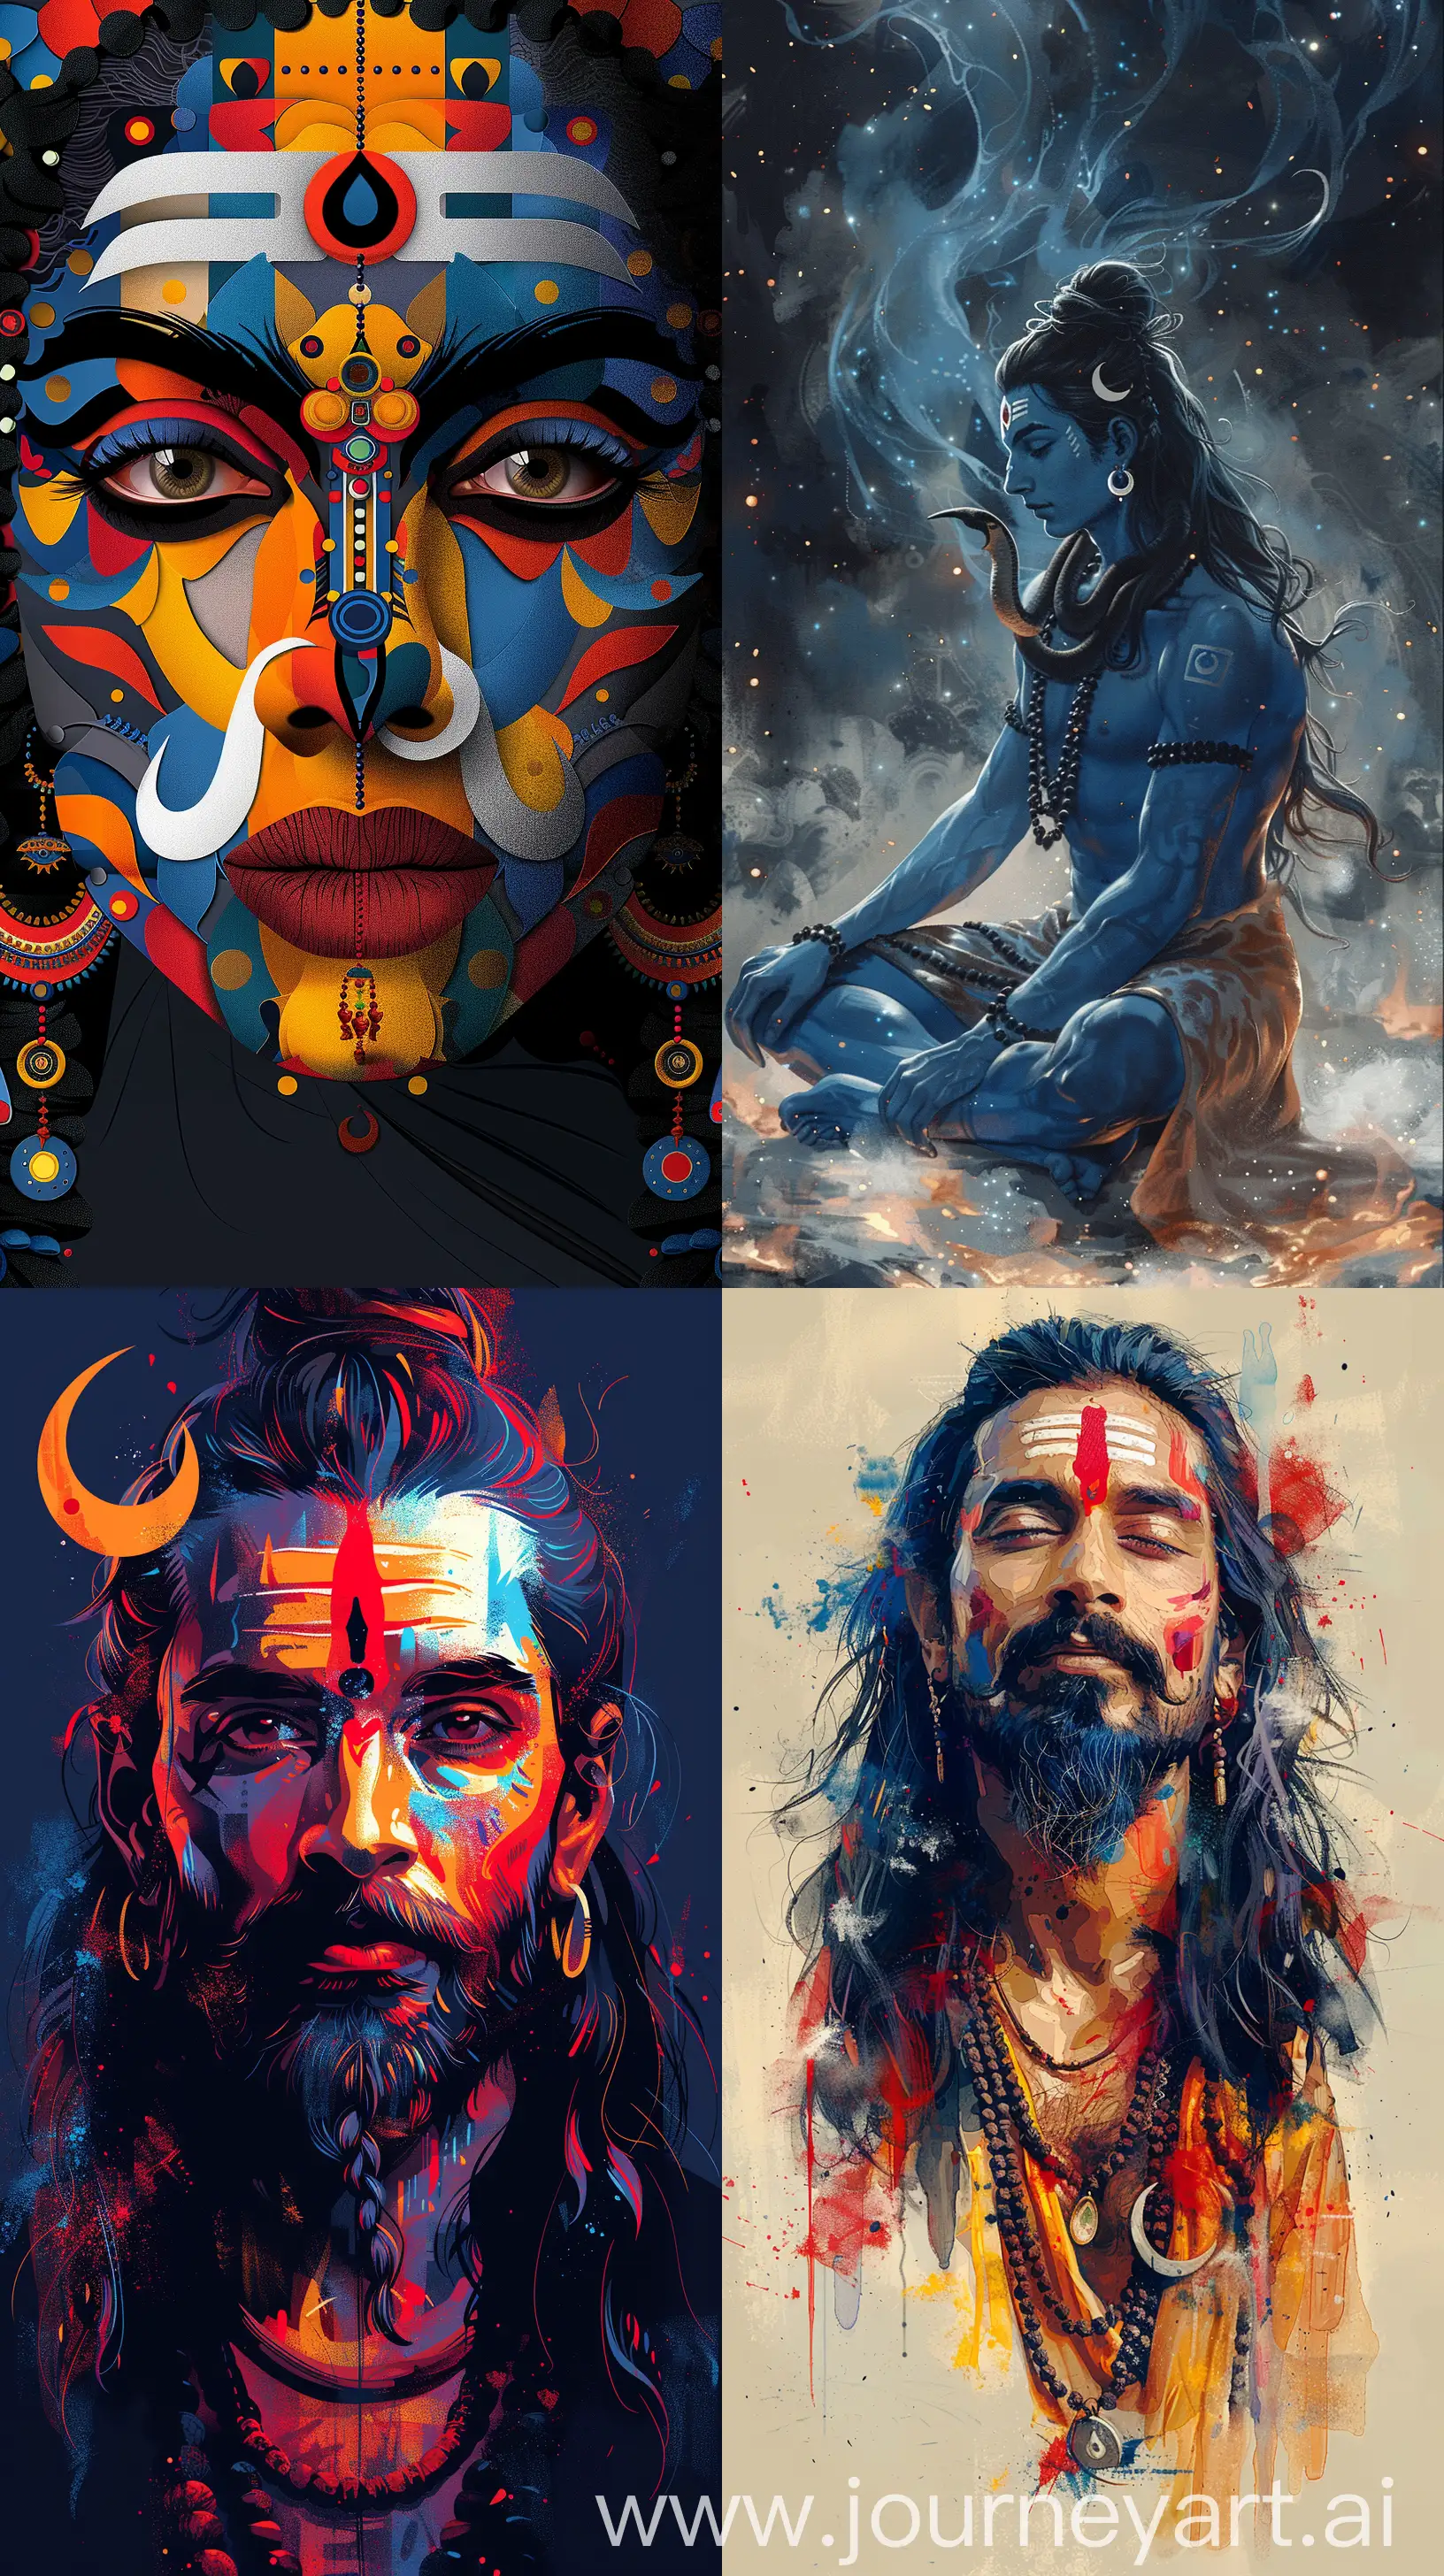 Surreal-Hindu-God-Lord-Shiva-Portrait-with-Cosmic-Universe-Background